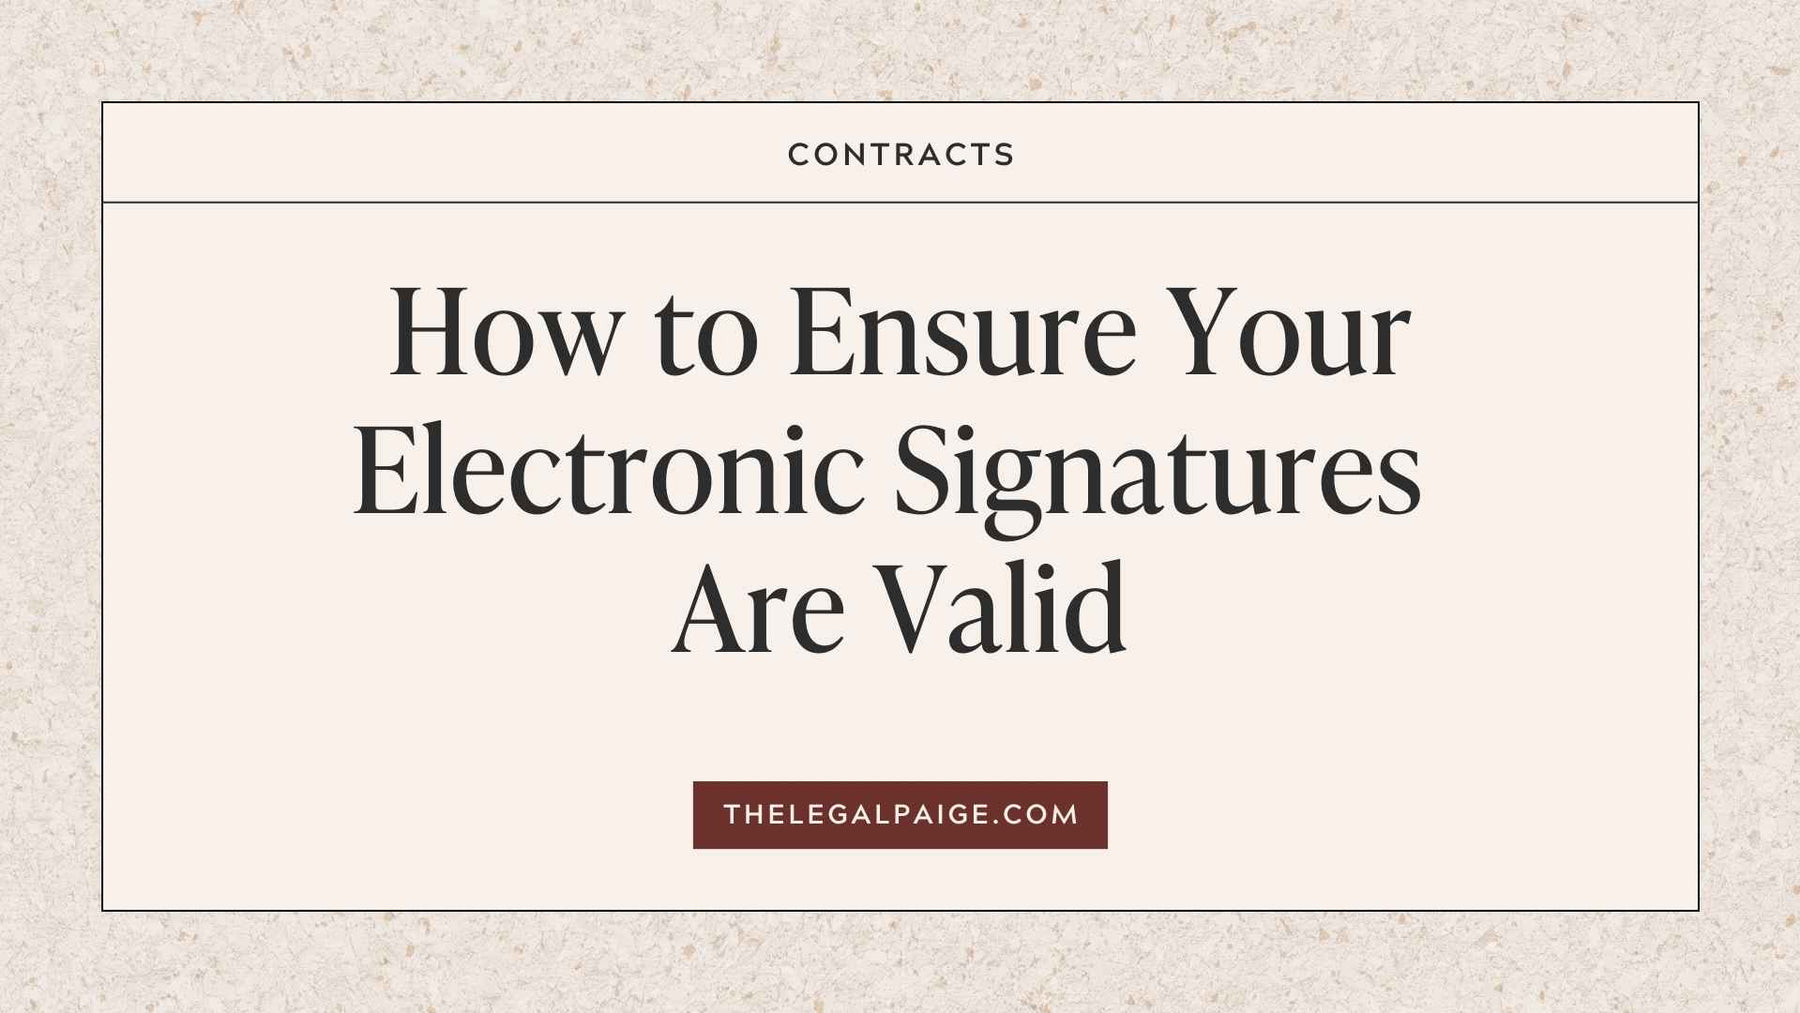 How to Ensure Your Electronic Signatures Are Valid